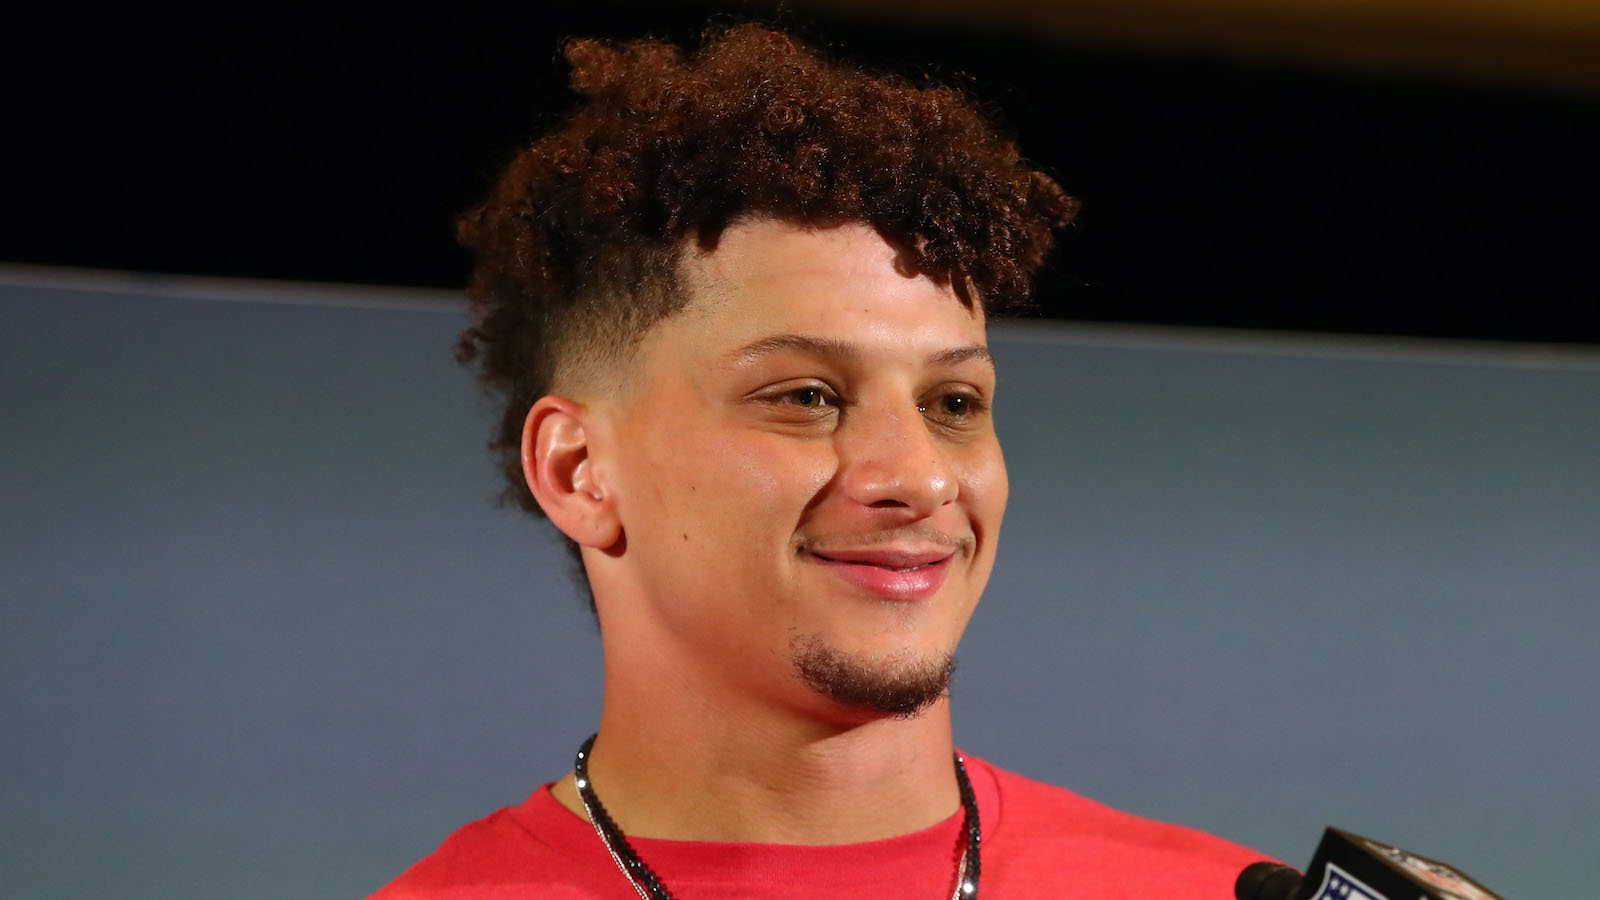 Patrick Mahomes Wears Same Underwear for Every Game, Says Chad Henne